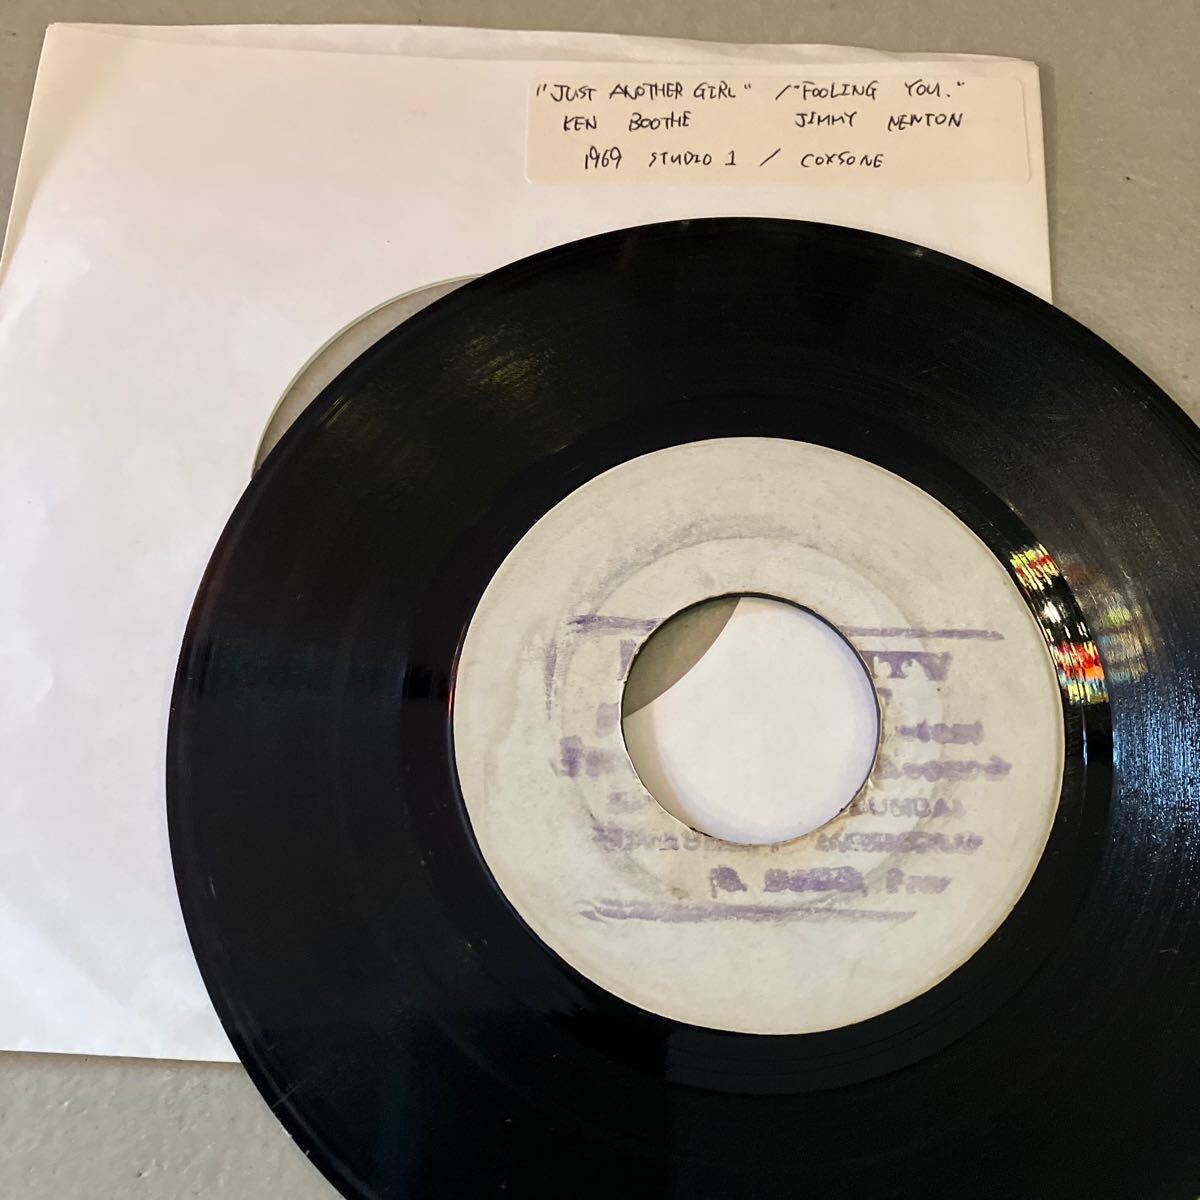 1968 COXSONE BLANK JA KEN BOOTHE - JUST ANOTHER GIRL c/w JIMMY NEWTON - FOOLING YOU /VG + 光沢も残っており概ね良好なコンディションの画像1